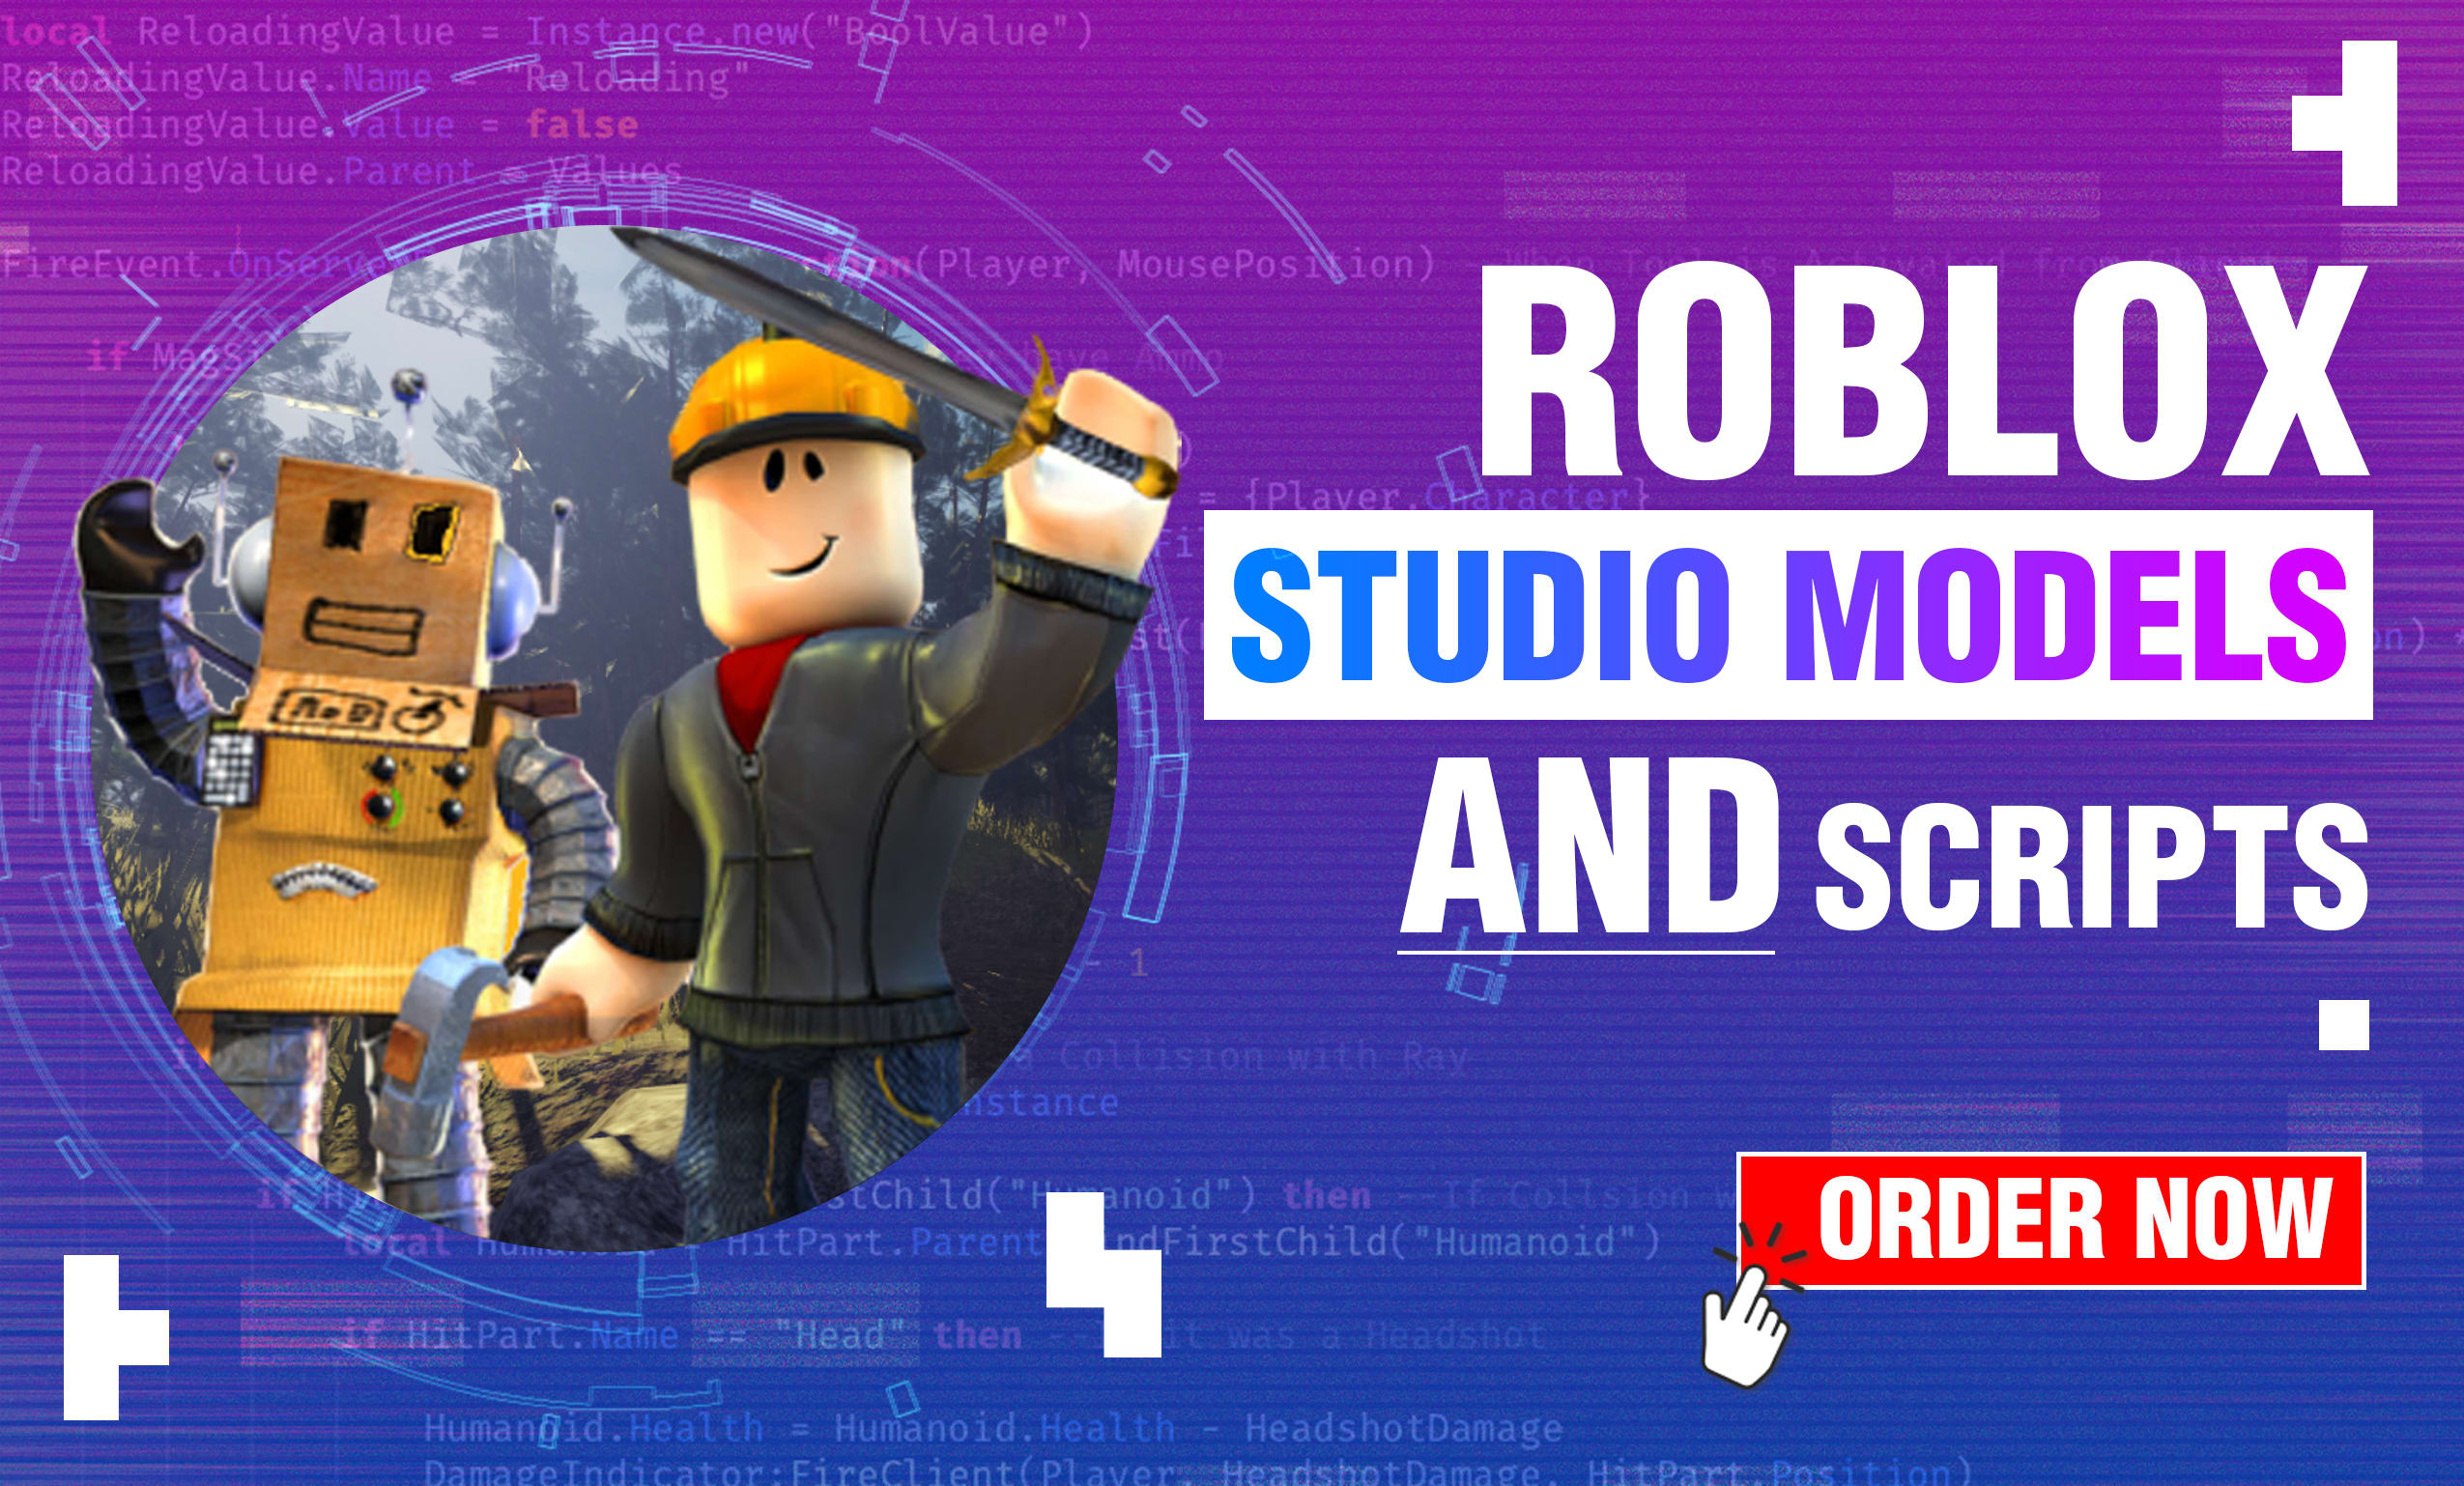 ANYONE Can Upload A Roblox Character Now… and it's a DISASTER